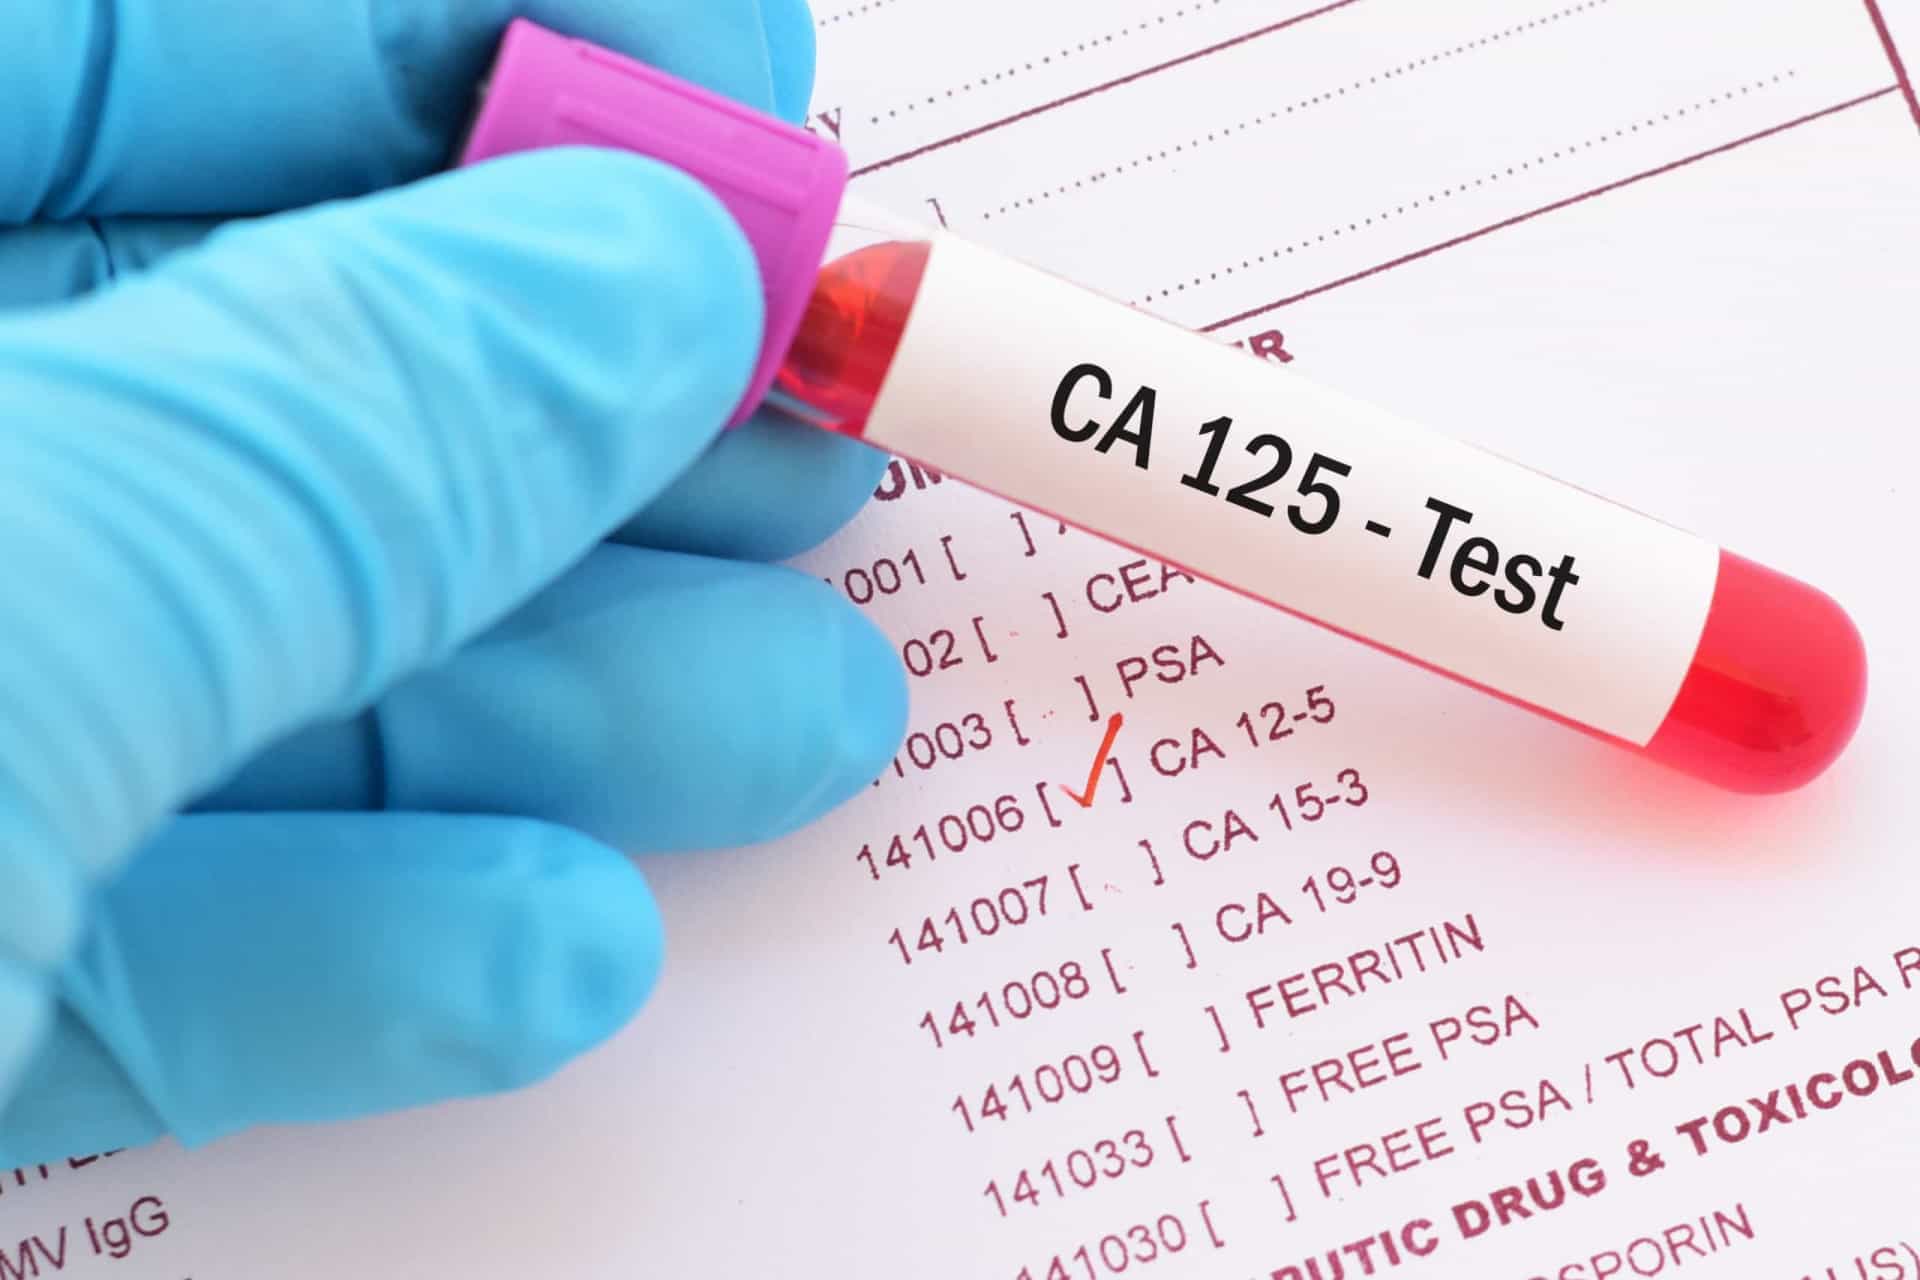 <p>This type of cancer is often diagnosed using two screening tests. These are a CA-125 blood test, and a transvaginal ultrasound.</p><p>You may also like:<a href="https://www.starsinsider.com/n/459958?utm_source=msn.com&utm_medium=display&utm_campaign=referral_description&utm_content=516289en-us"> Signs you were raised by helicopter parents</a></p>